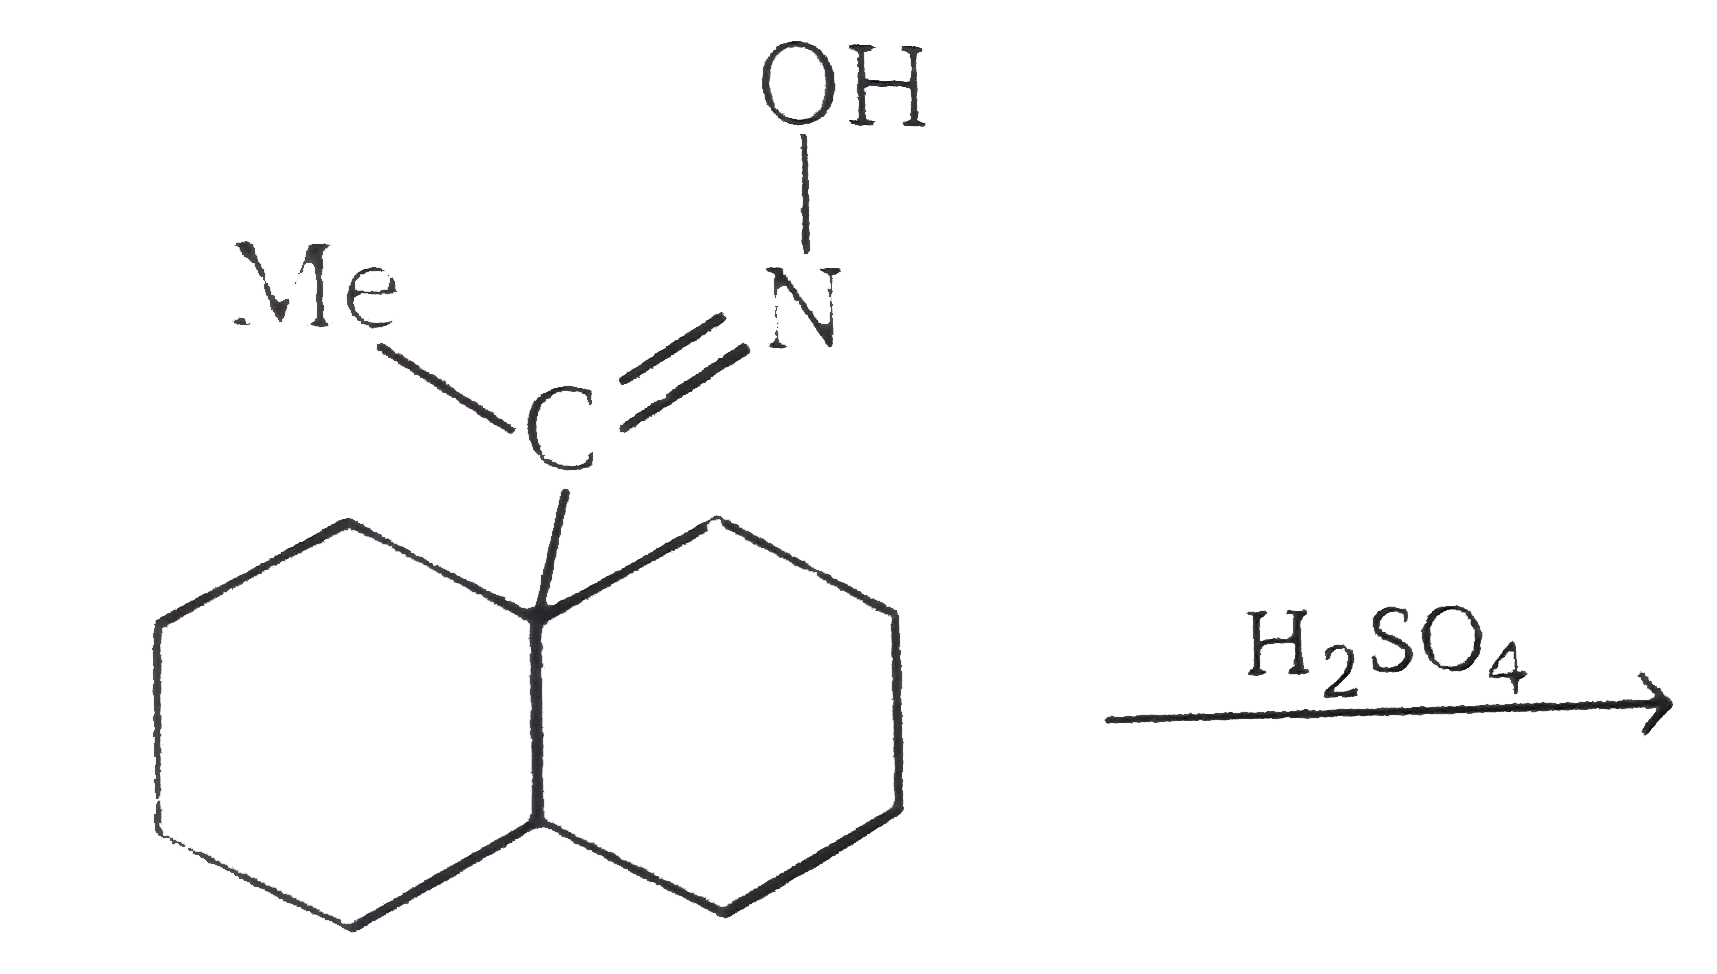 Product and name of the reaction is :